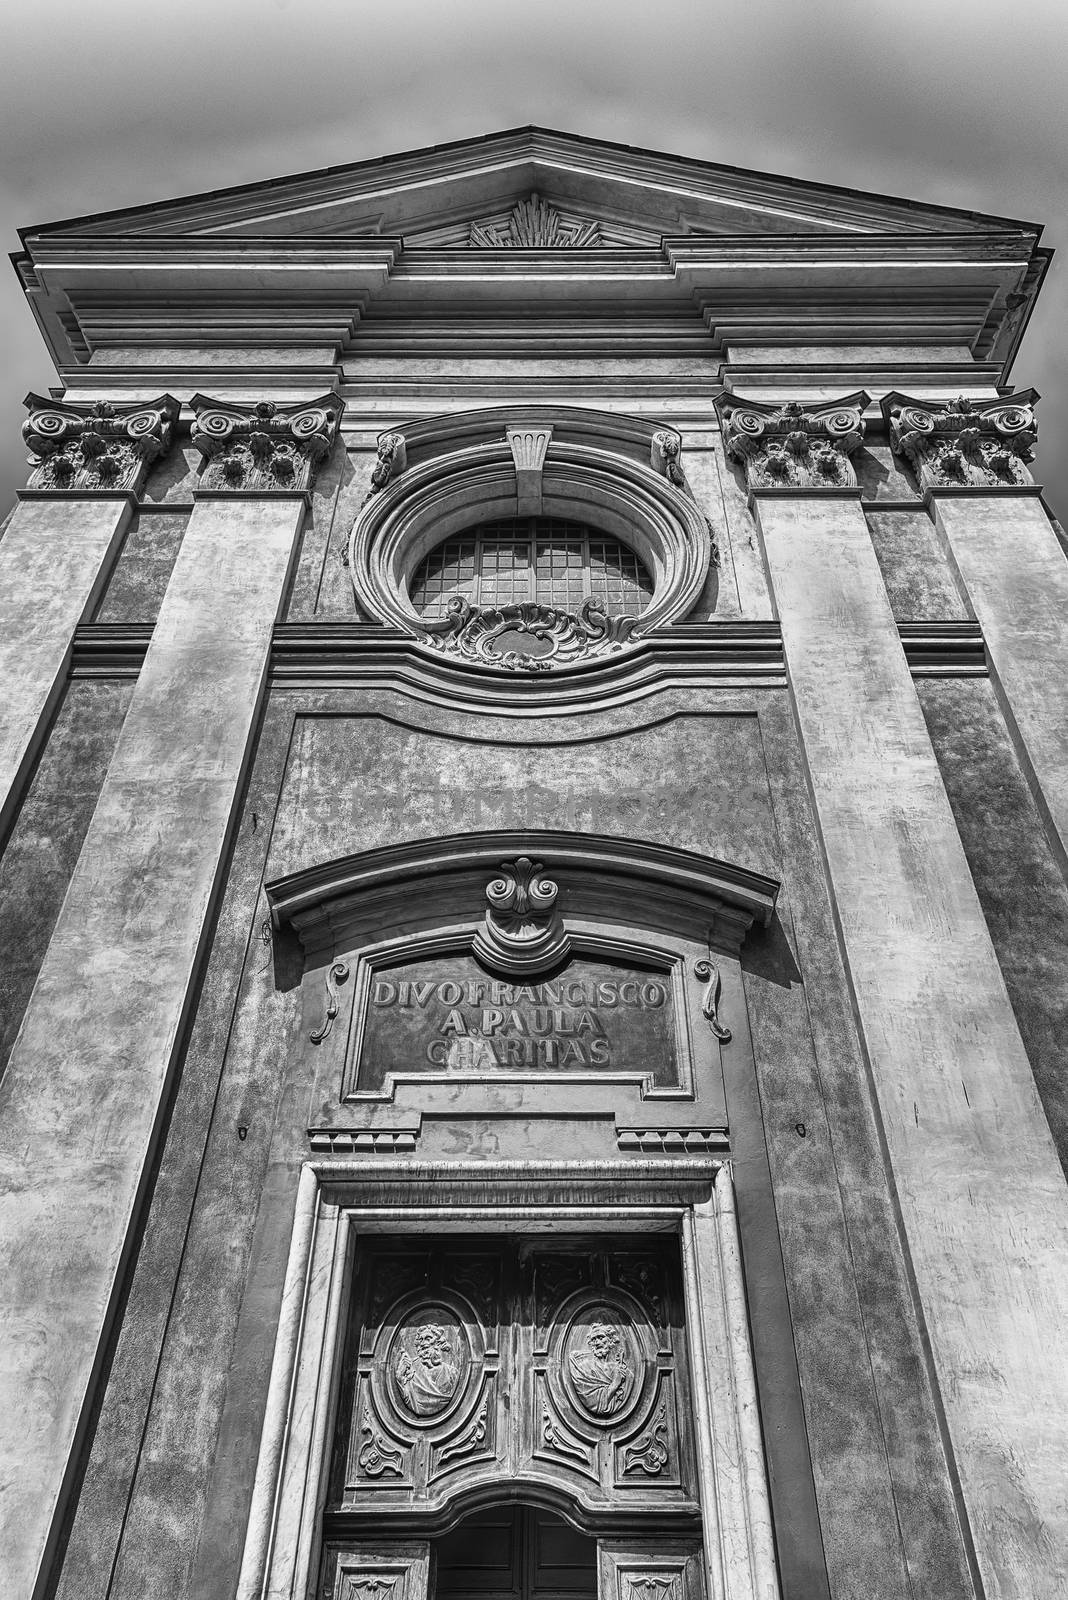 Facade of the Church of Saint Francis of Paola, Nice, Cote d'Azur, France